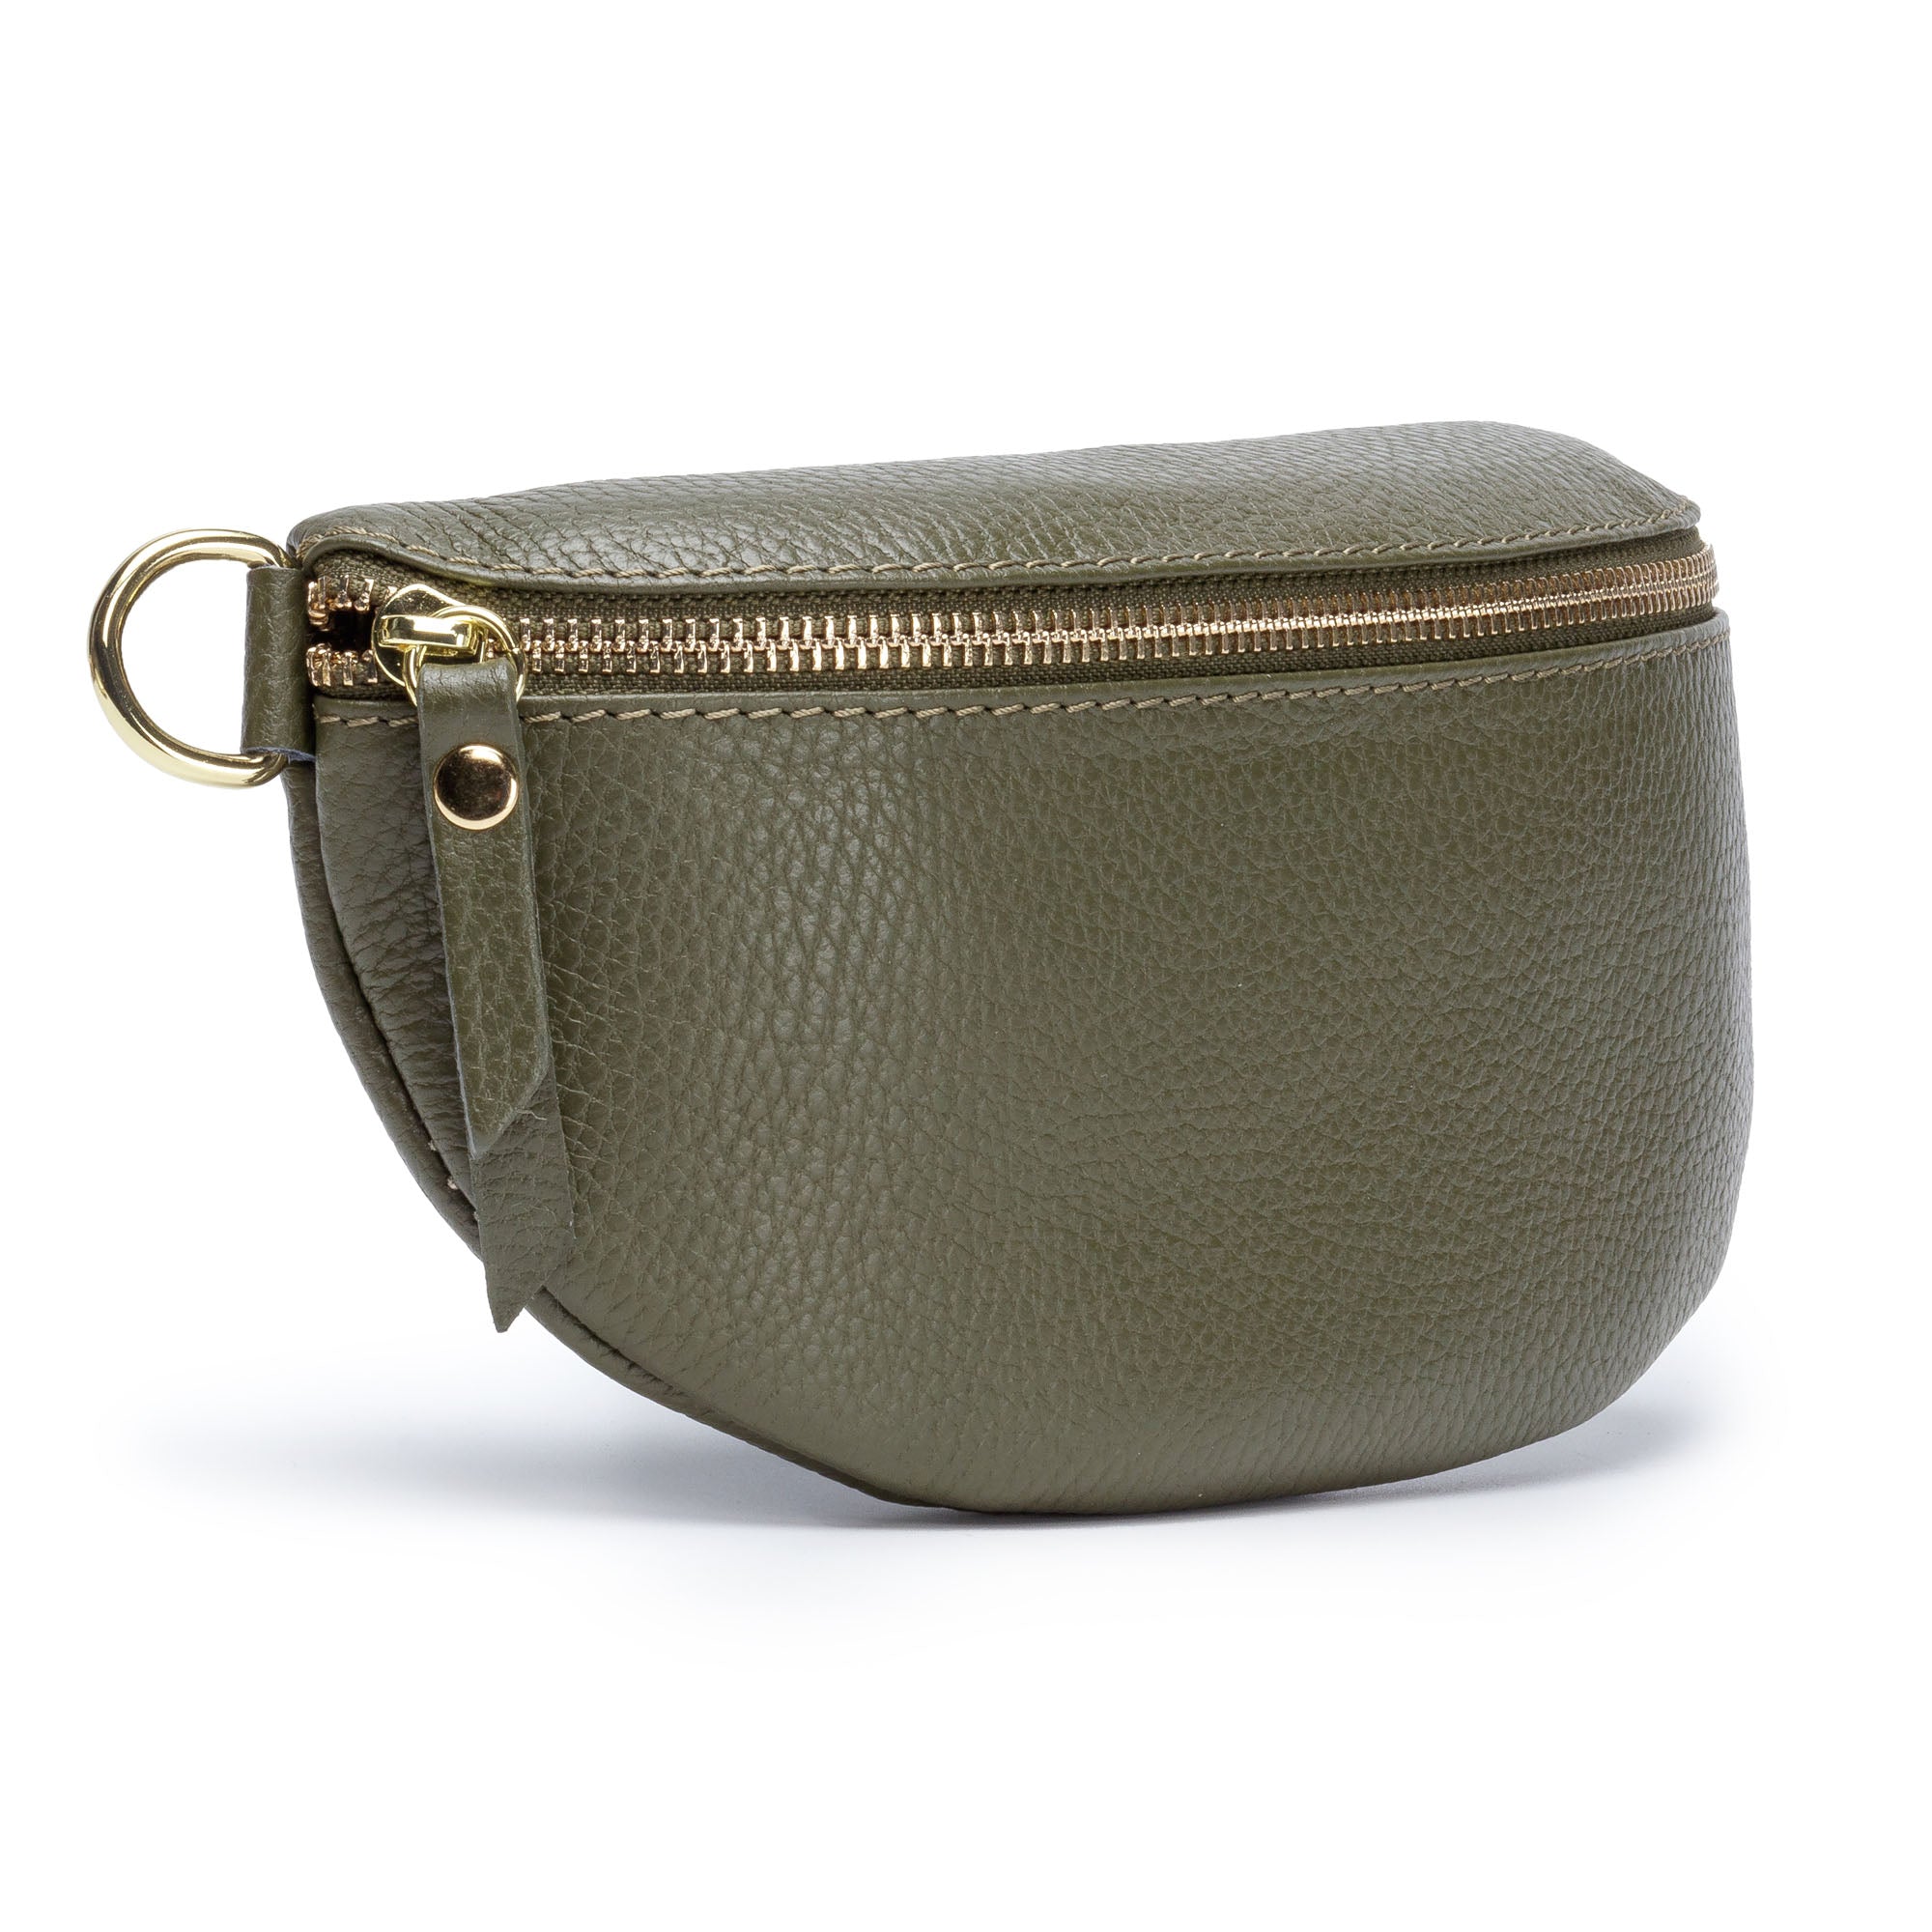 Sling Bag - Olive with Army Stripes Strap